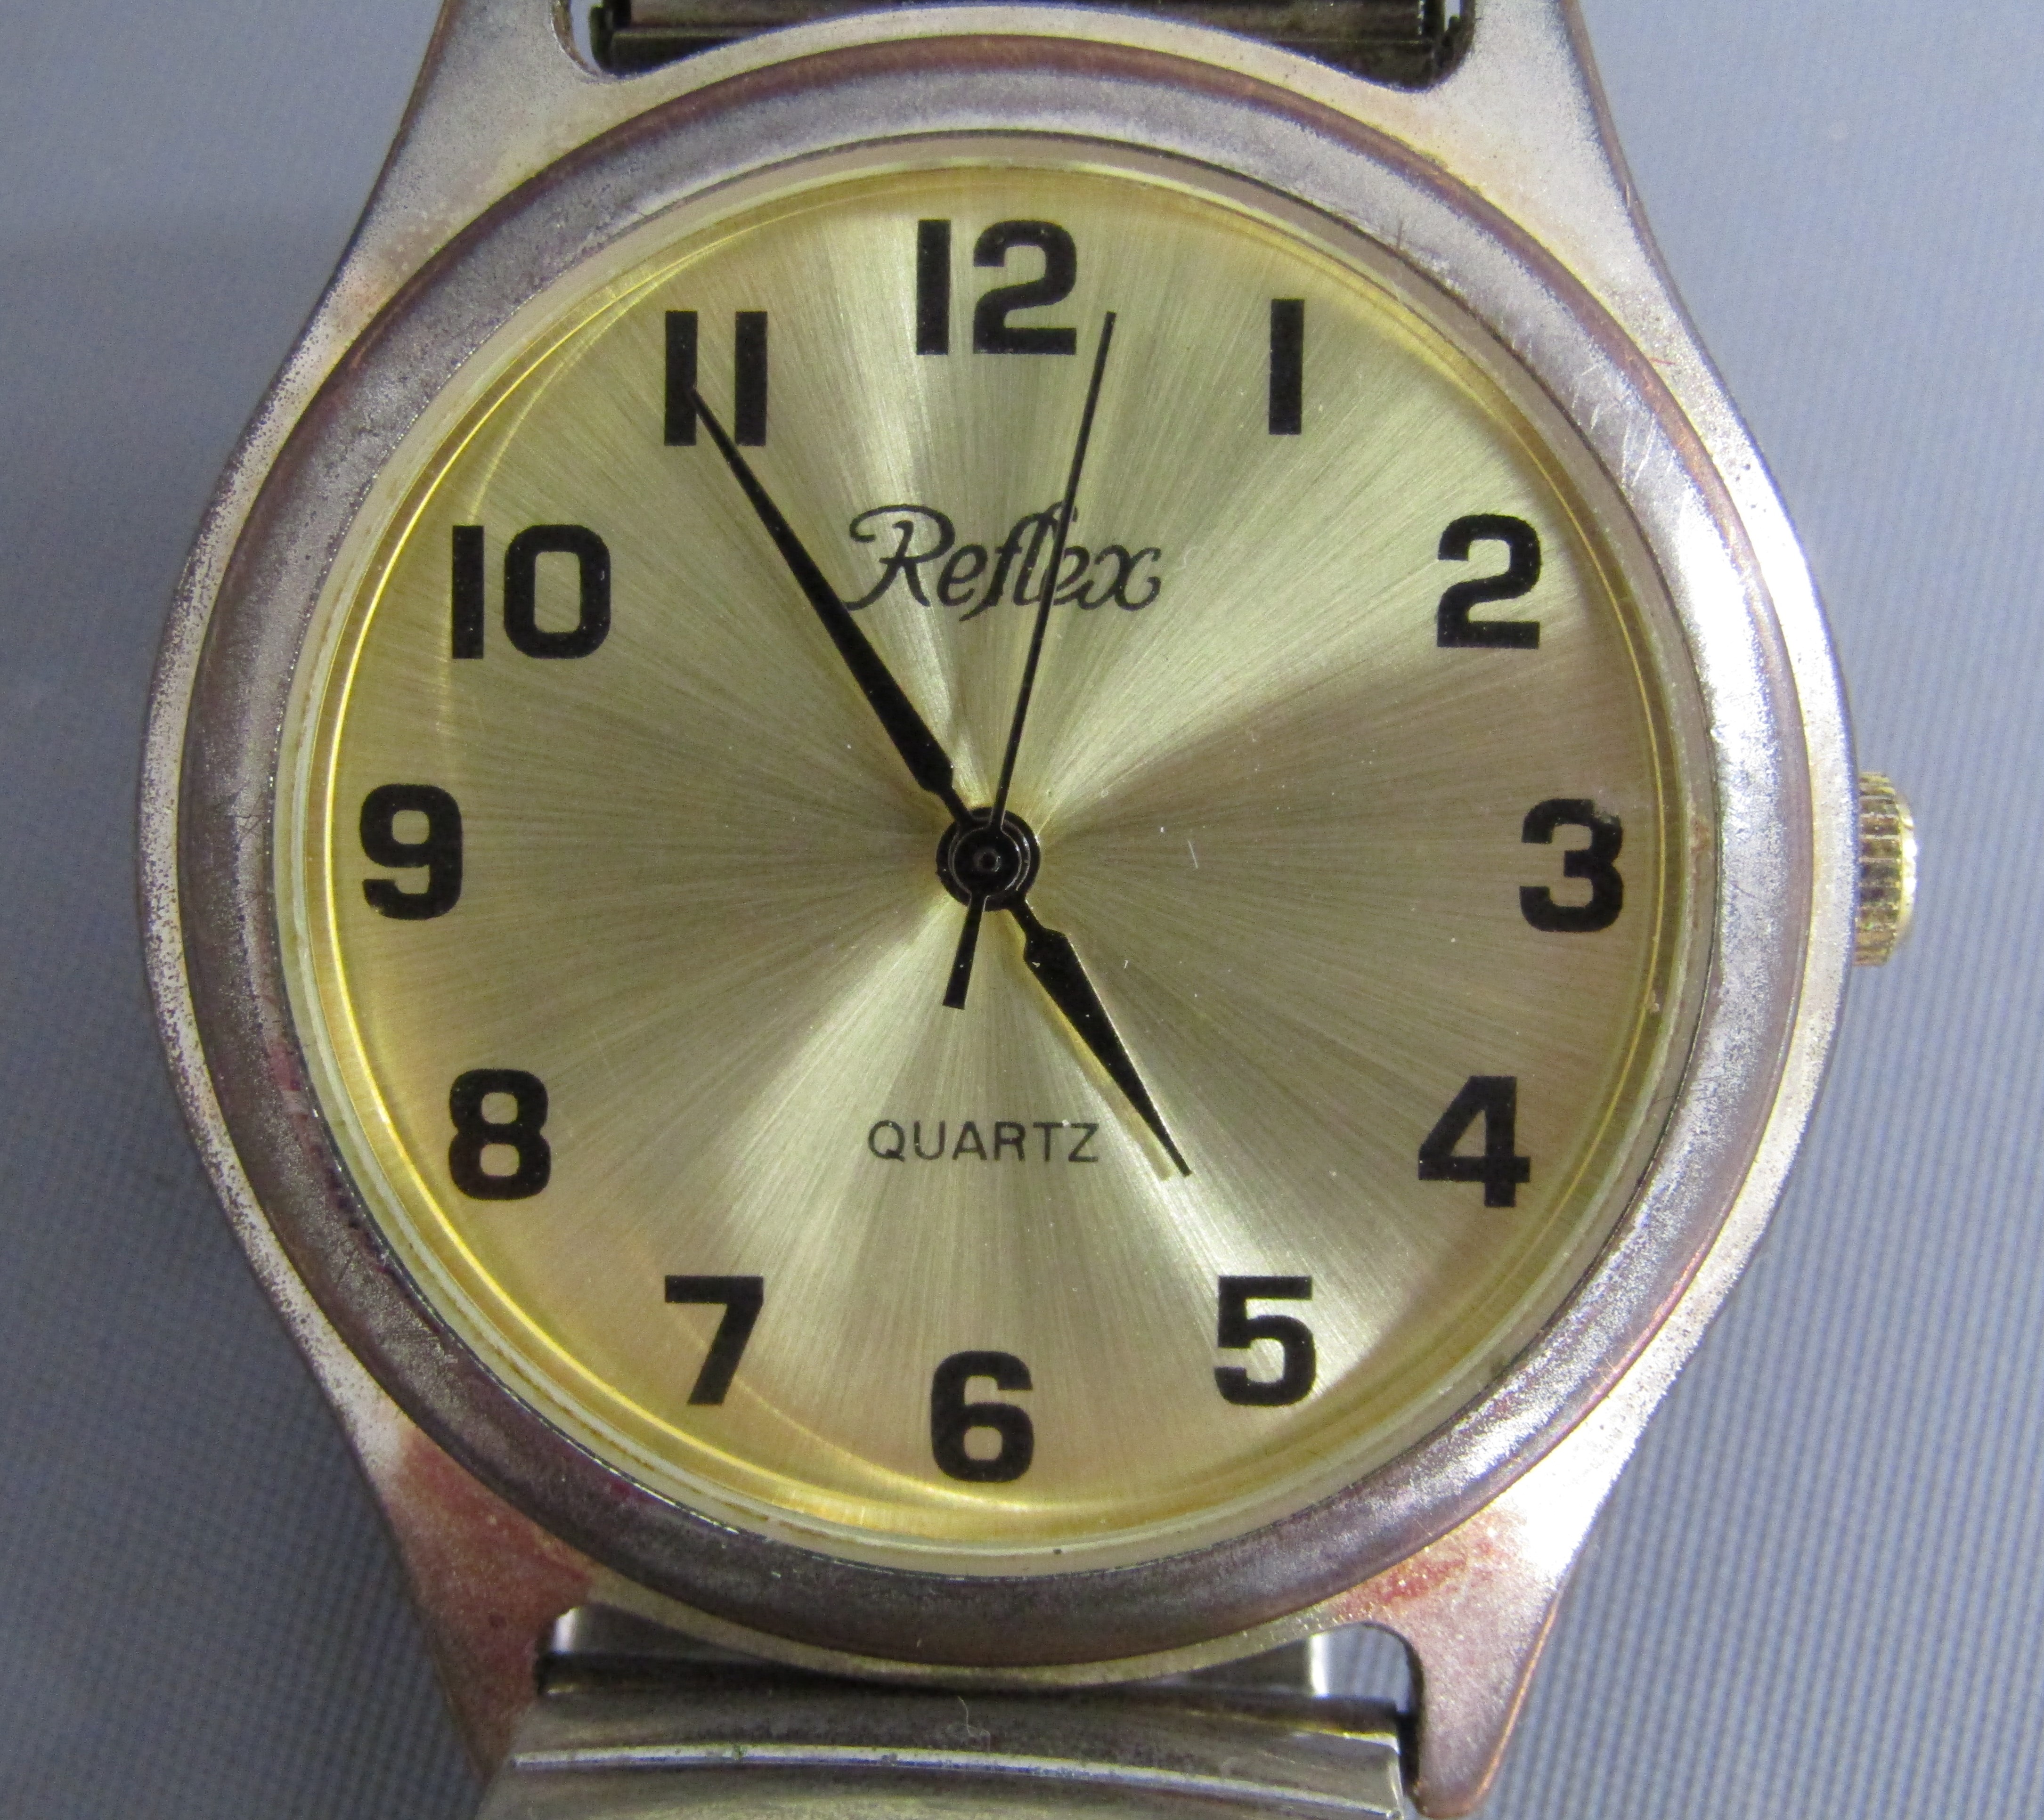 Ladies watches includes Sekonda, Accurist and Excalibur also a men's Reflex watch and Smiths and - Image 7 of 9